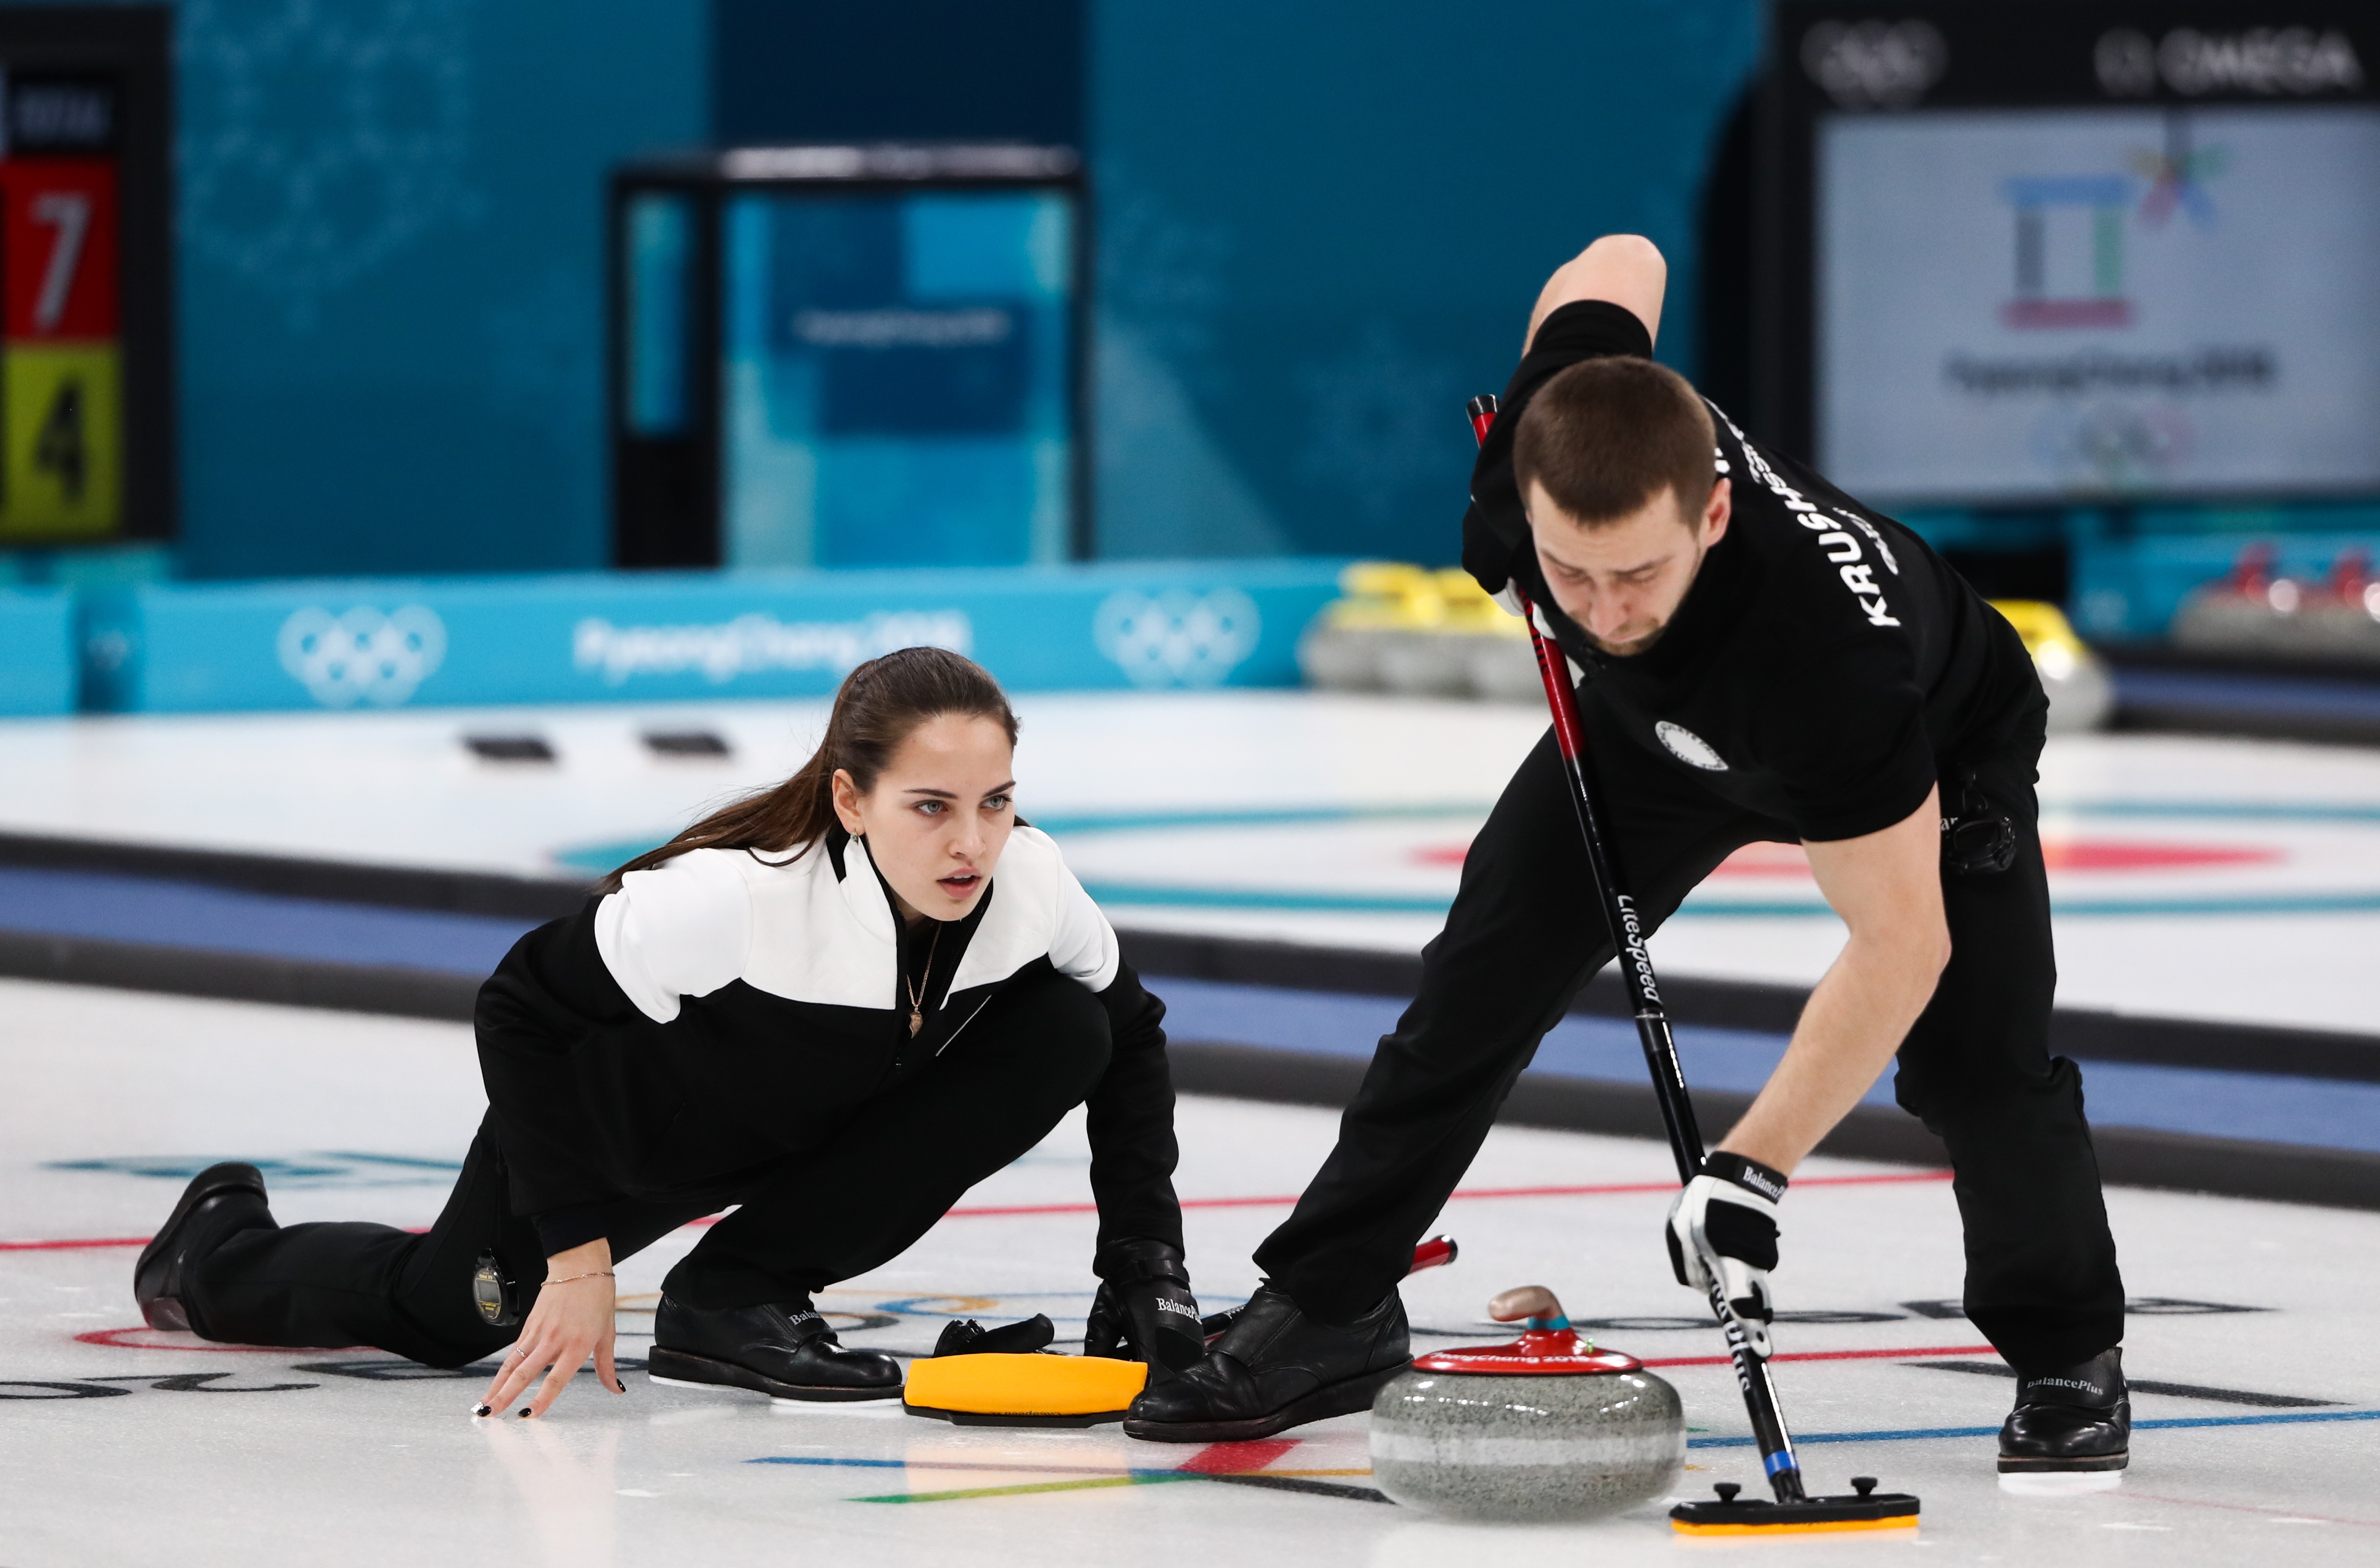 Curlers Alexander Krushelnitsky (R) and Anastasia Bryzgalova, Olympic Athletes from Russia, in their mixed doubles curling bronze medal match against Norway's Kristin Skaslien and Magnus Nedregotten during the 2018 Winter Olympic Games, at the Gangneung Curling Centre. (Valery Sharifulin—Valery Sharifulin/TASS)